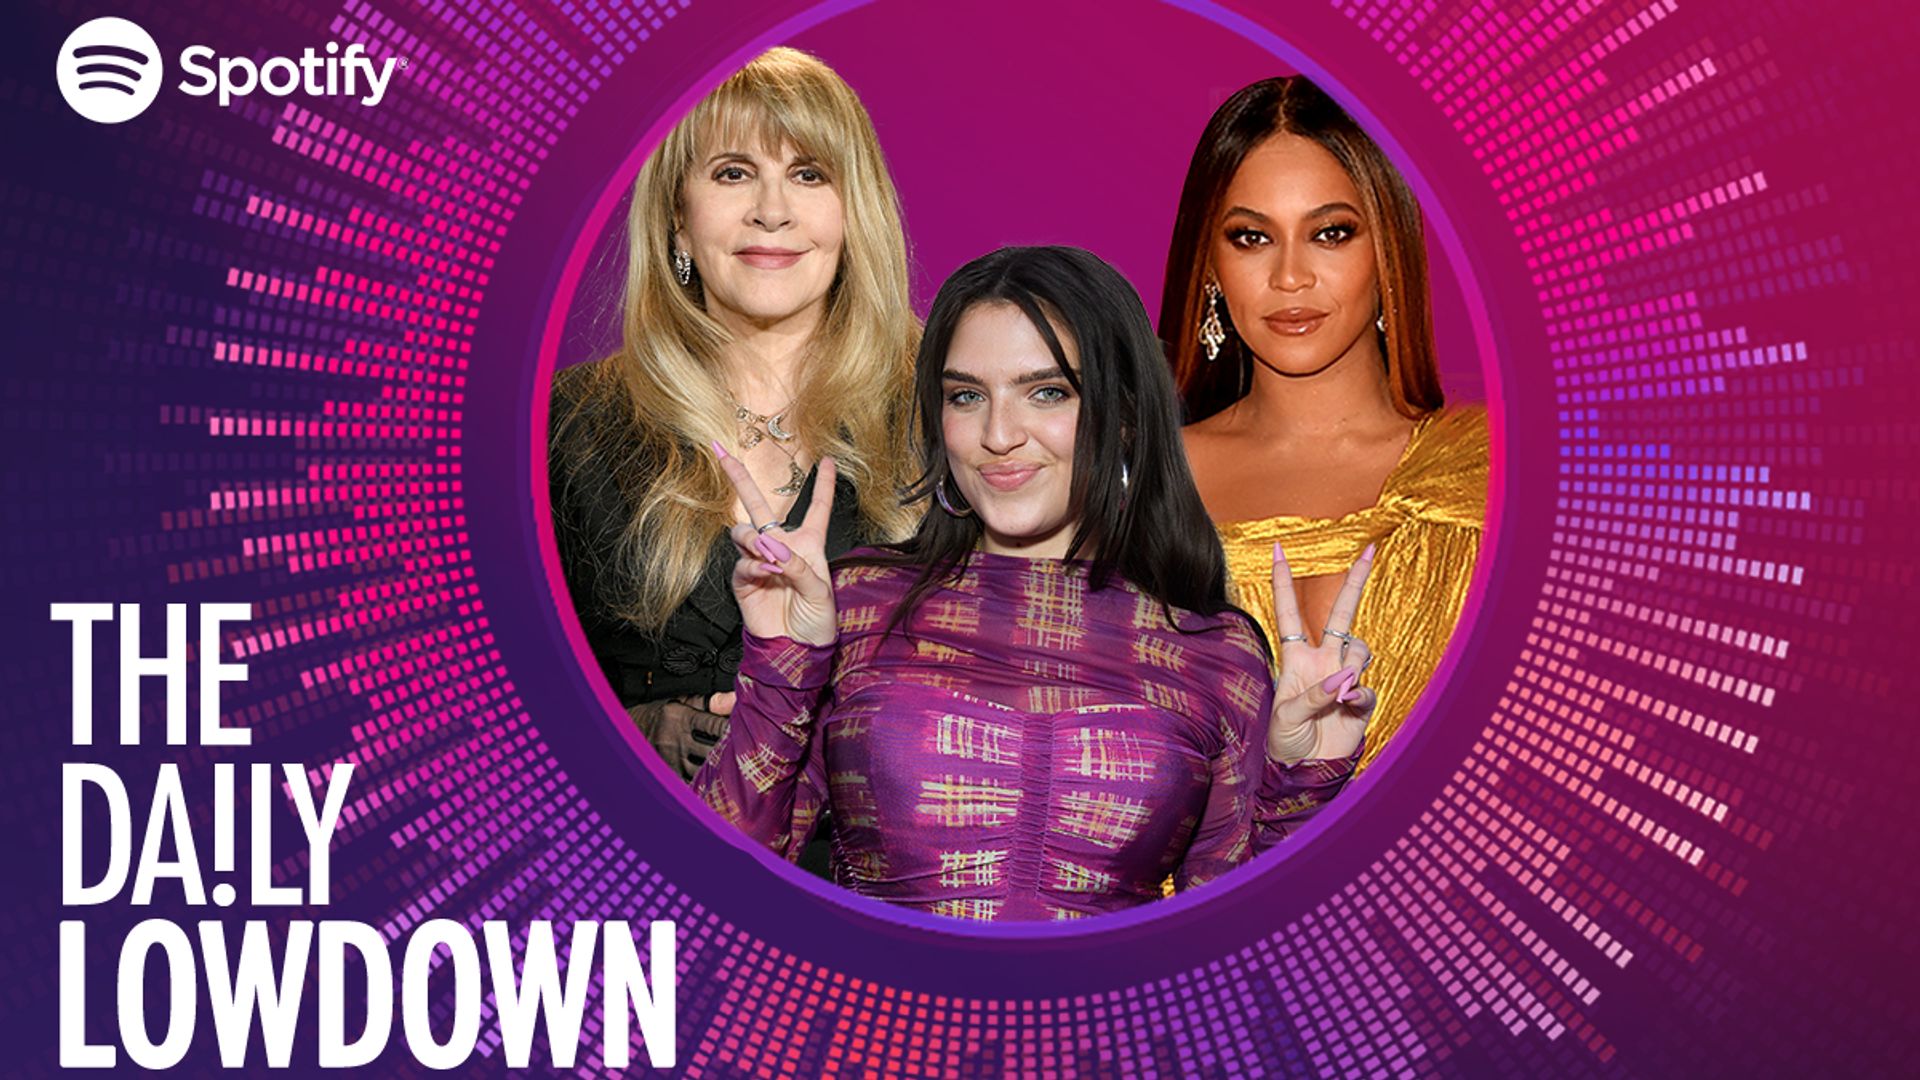 Stevie Knicks, Charli XCX and Beyonce in Daily Lowdown logo